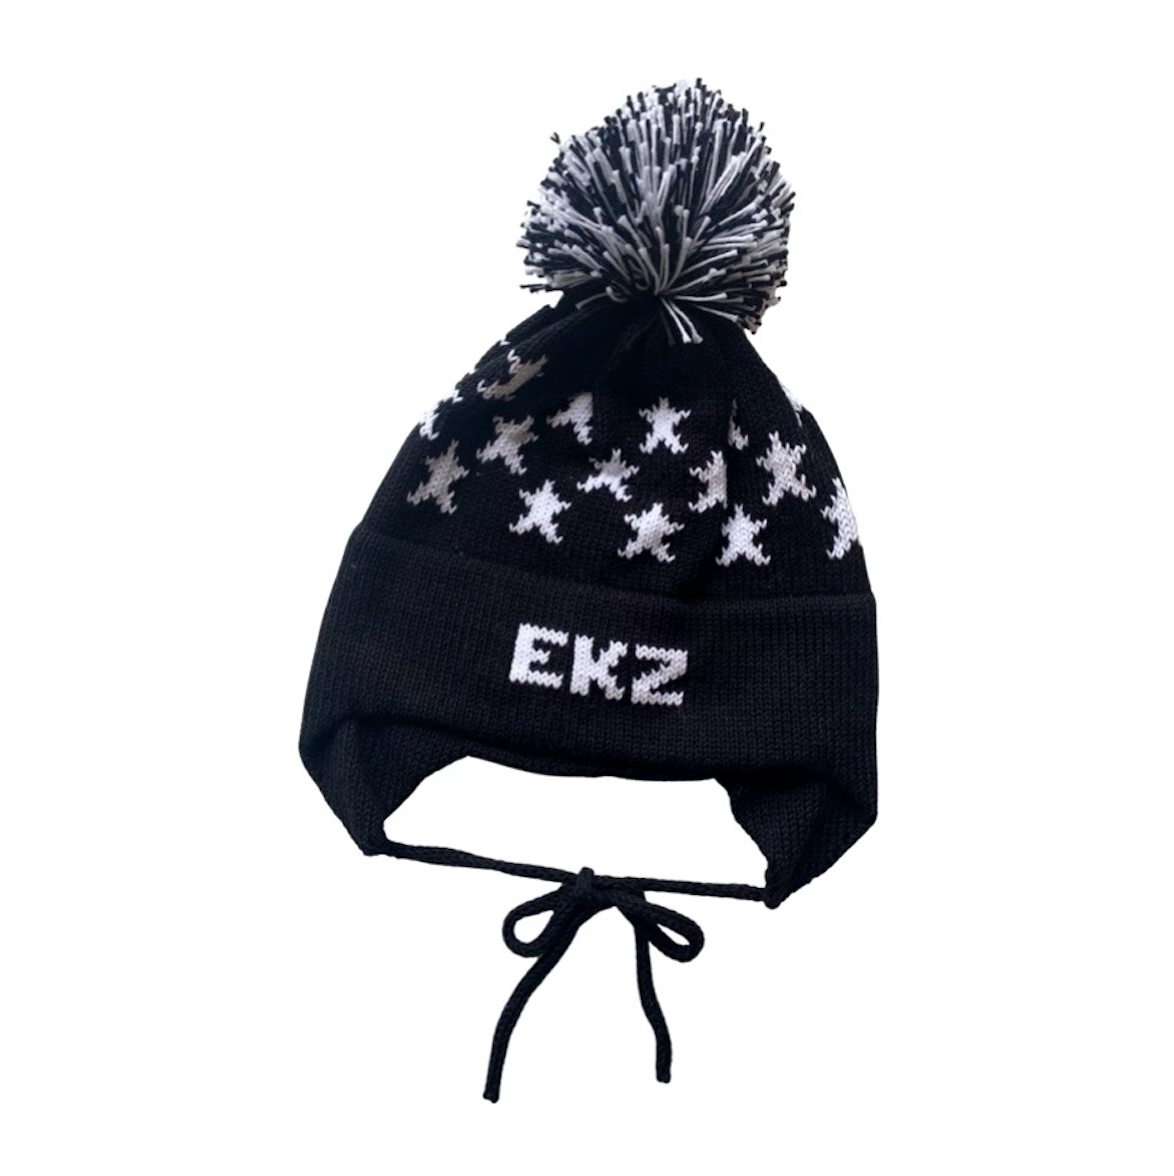 Stars Earflap Hat, Black with White